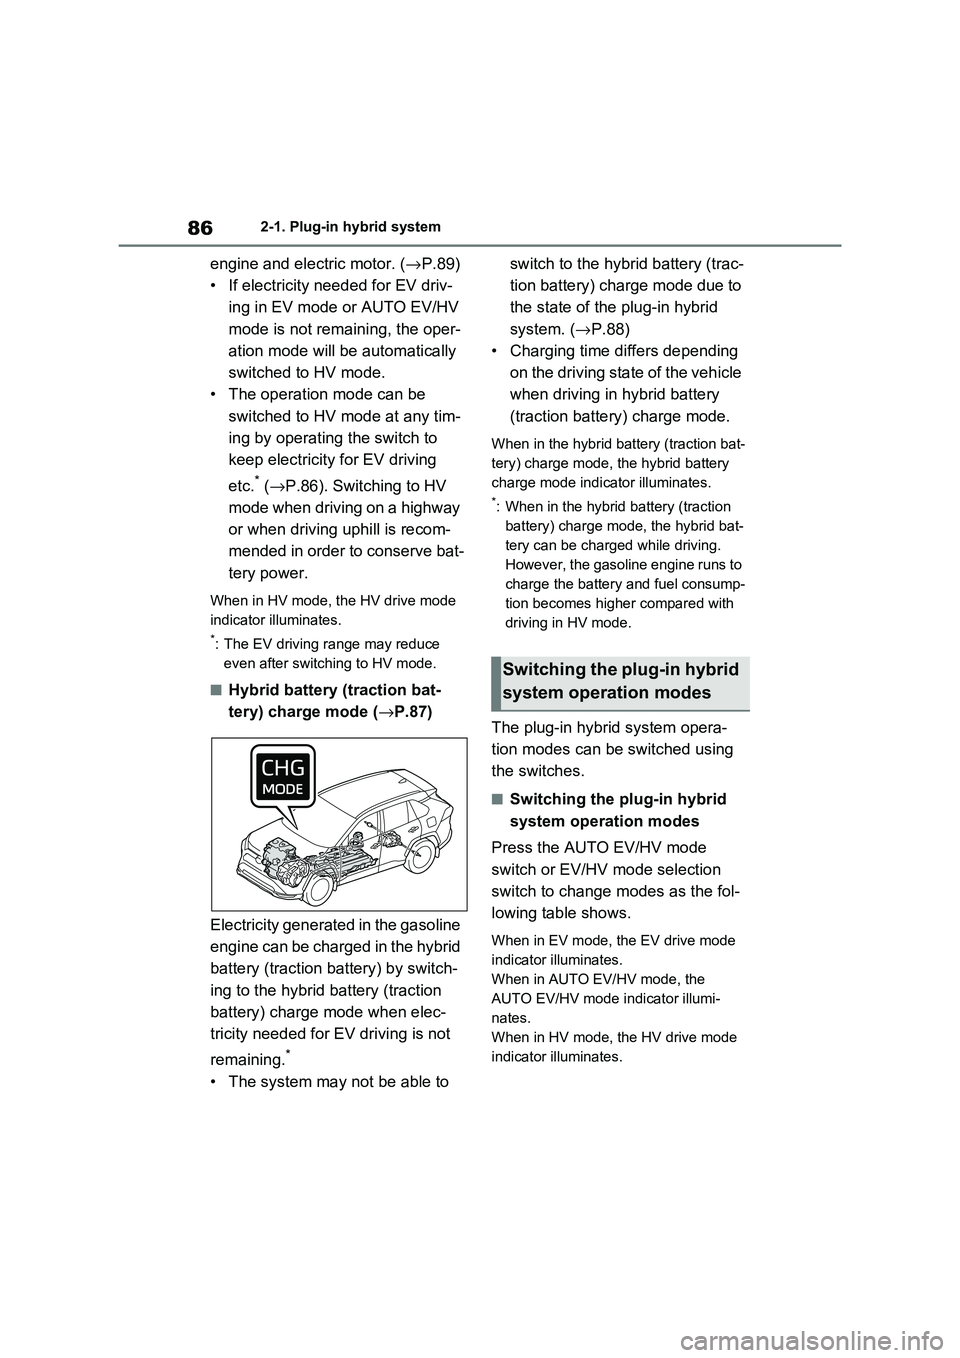 TOYOTA RAV4 PHEV 2021  Owners Manual 862-1. Plug-in hybrid system
engine and electric motor. (→P.89) 
• If electricity needed for EV driv - 
ing in EV mode or AUTO EV/HV 
mode is not remaining, the oper - 
ation mode will  be automat